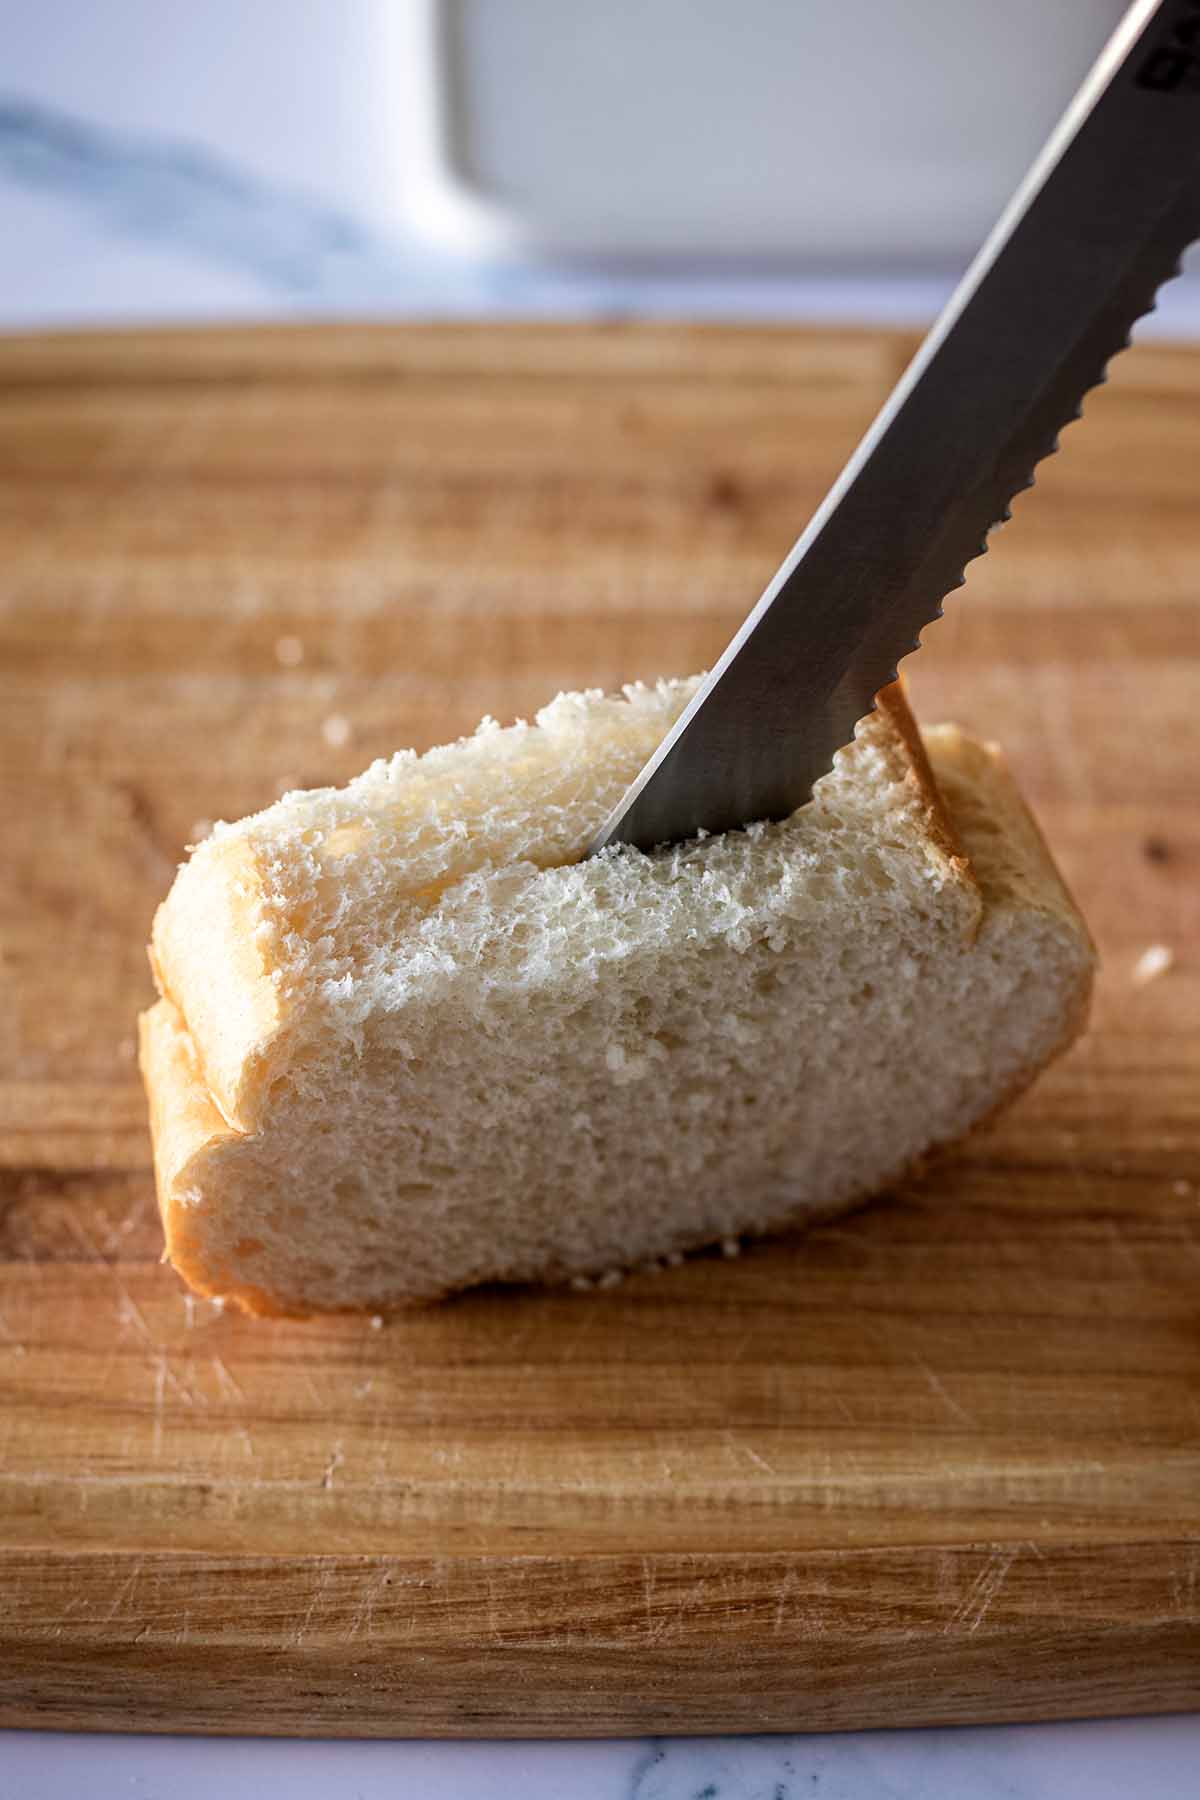 Knife cutting a slit in a slice of bread on a cutting board